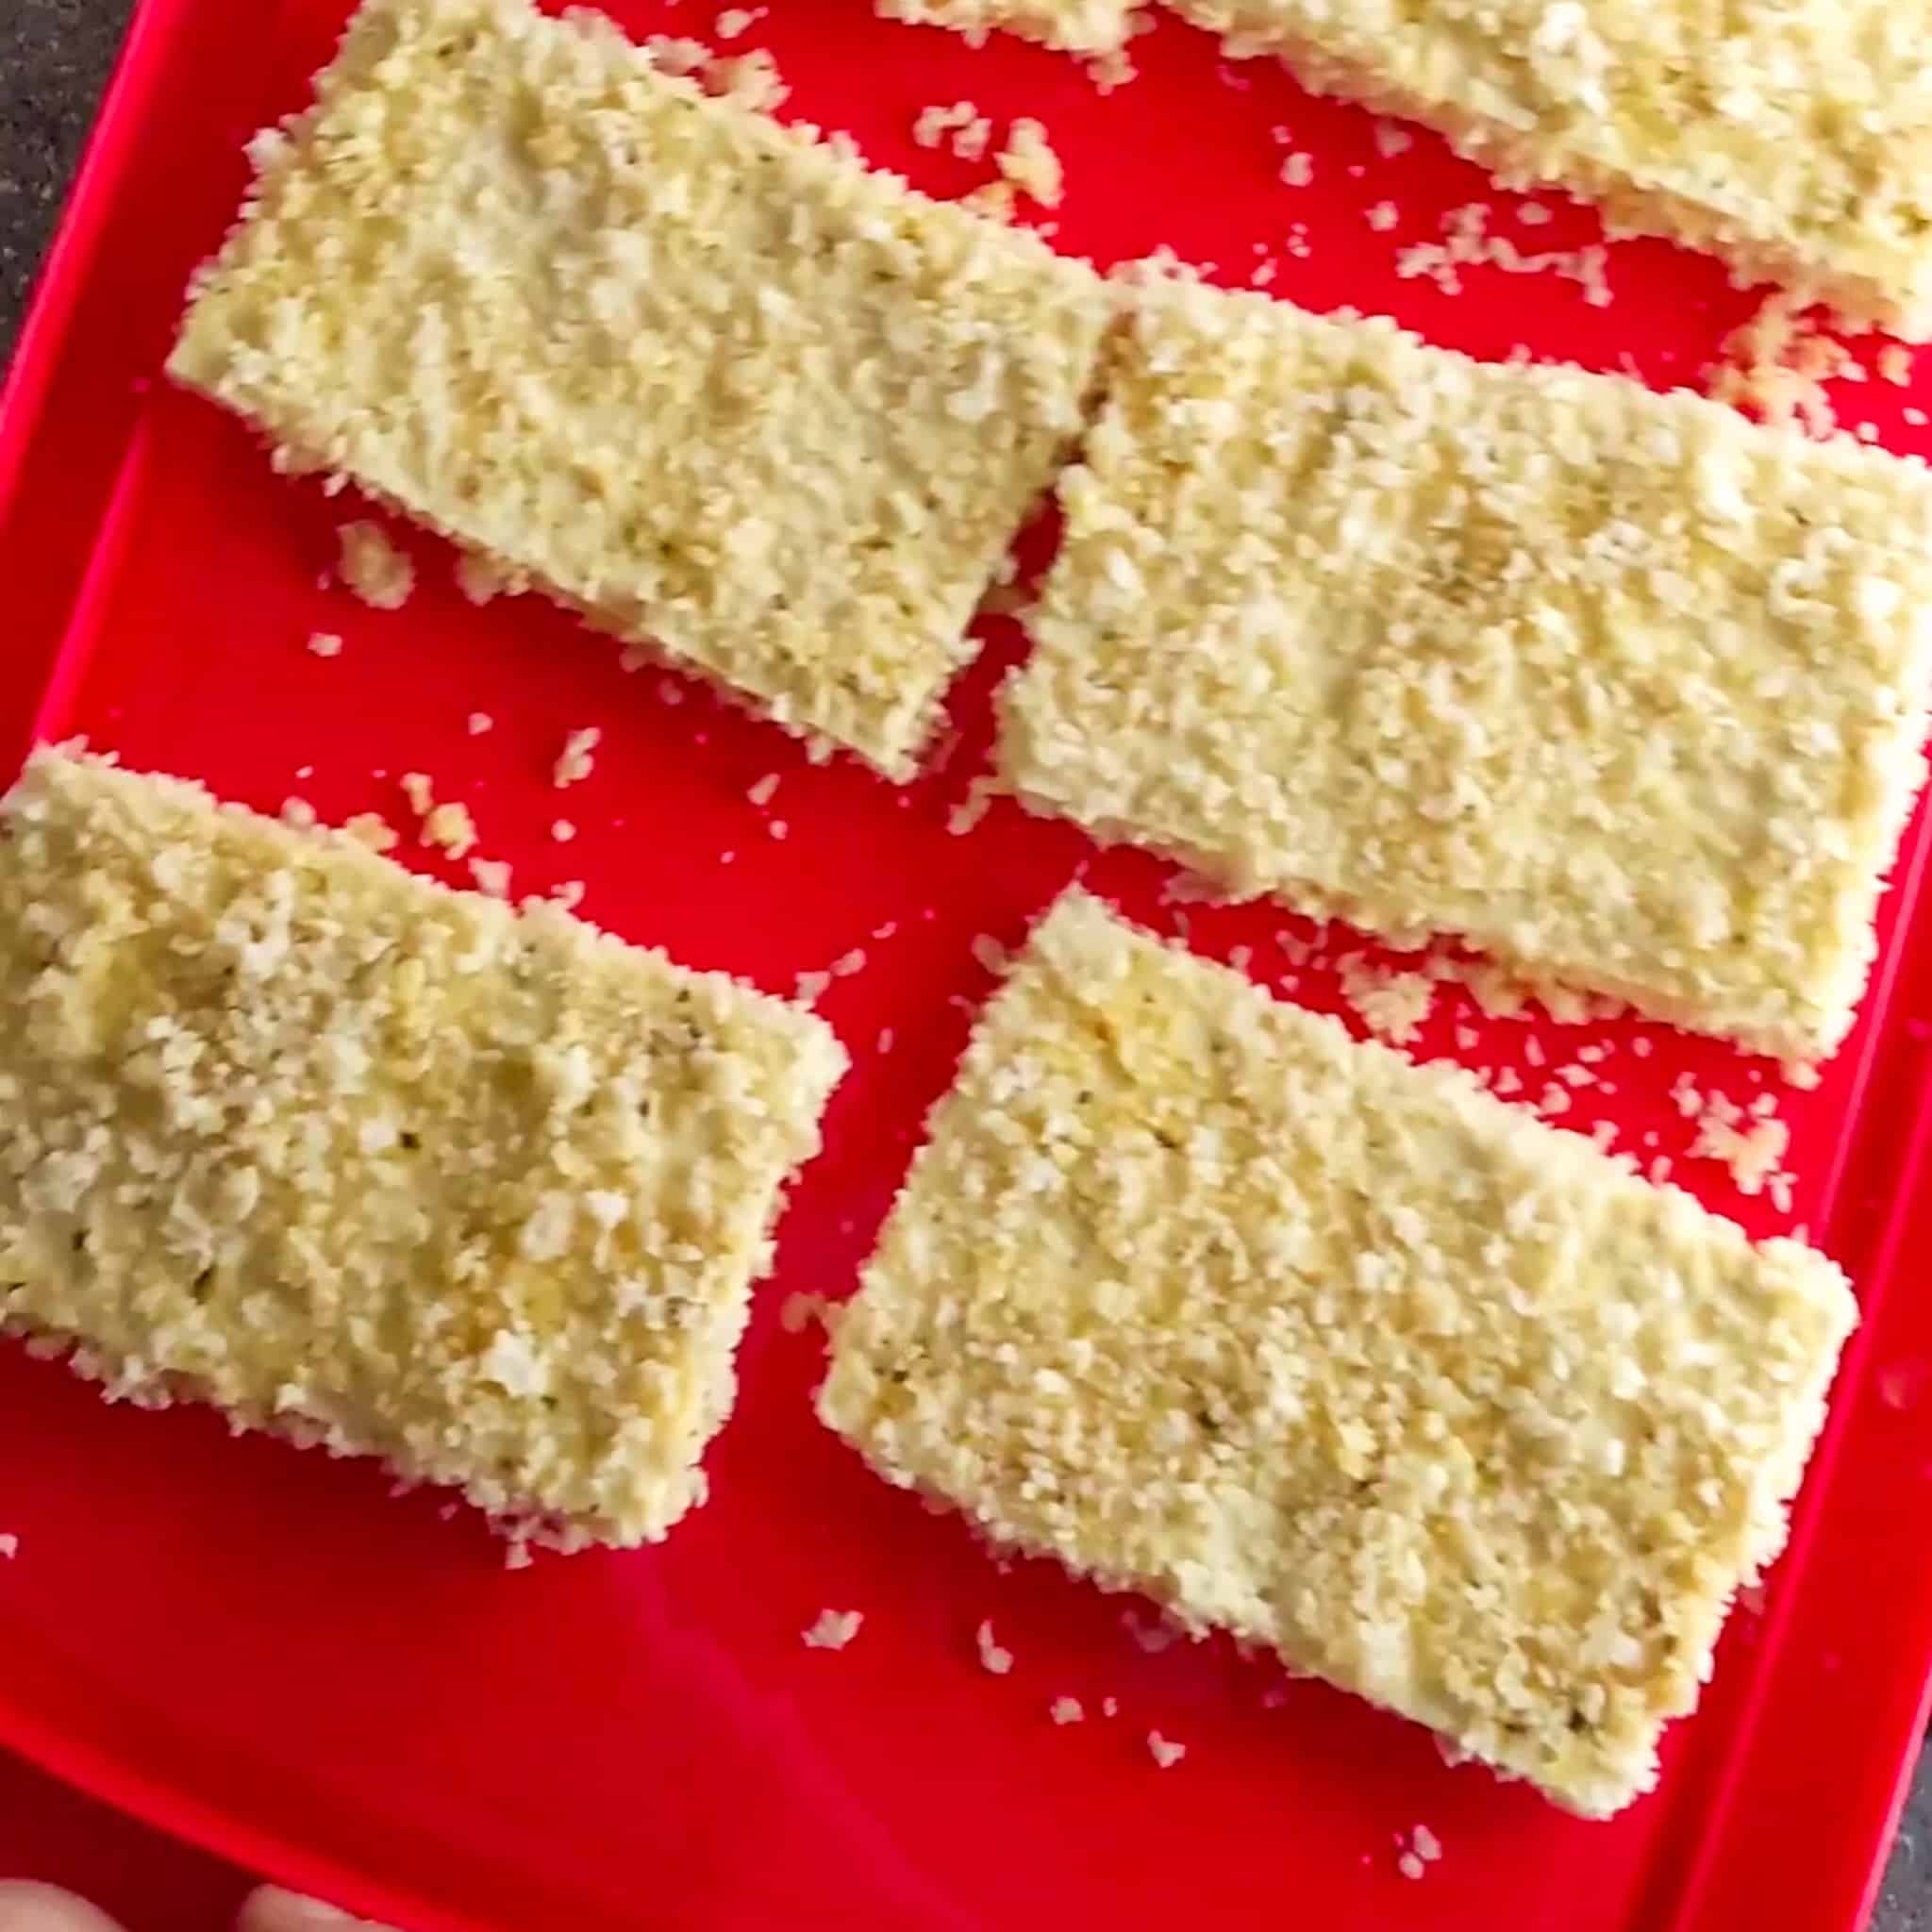 6 breaded large tofu slices laid in two rows on a flat container